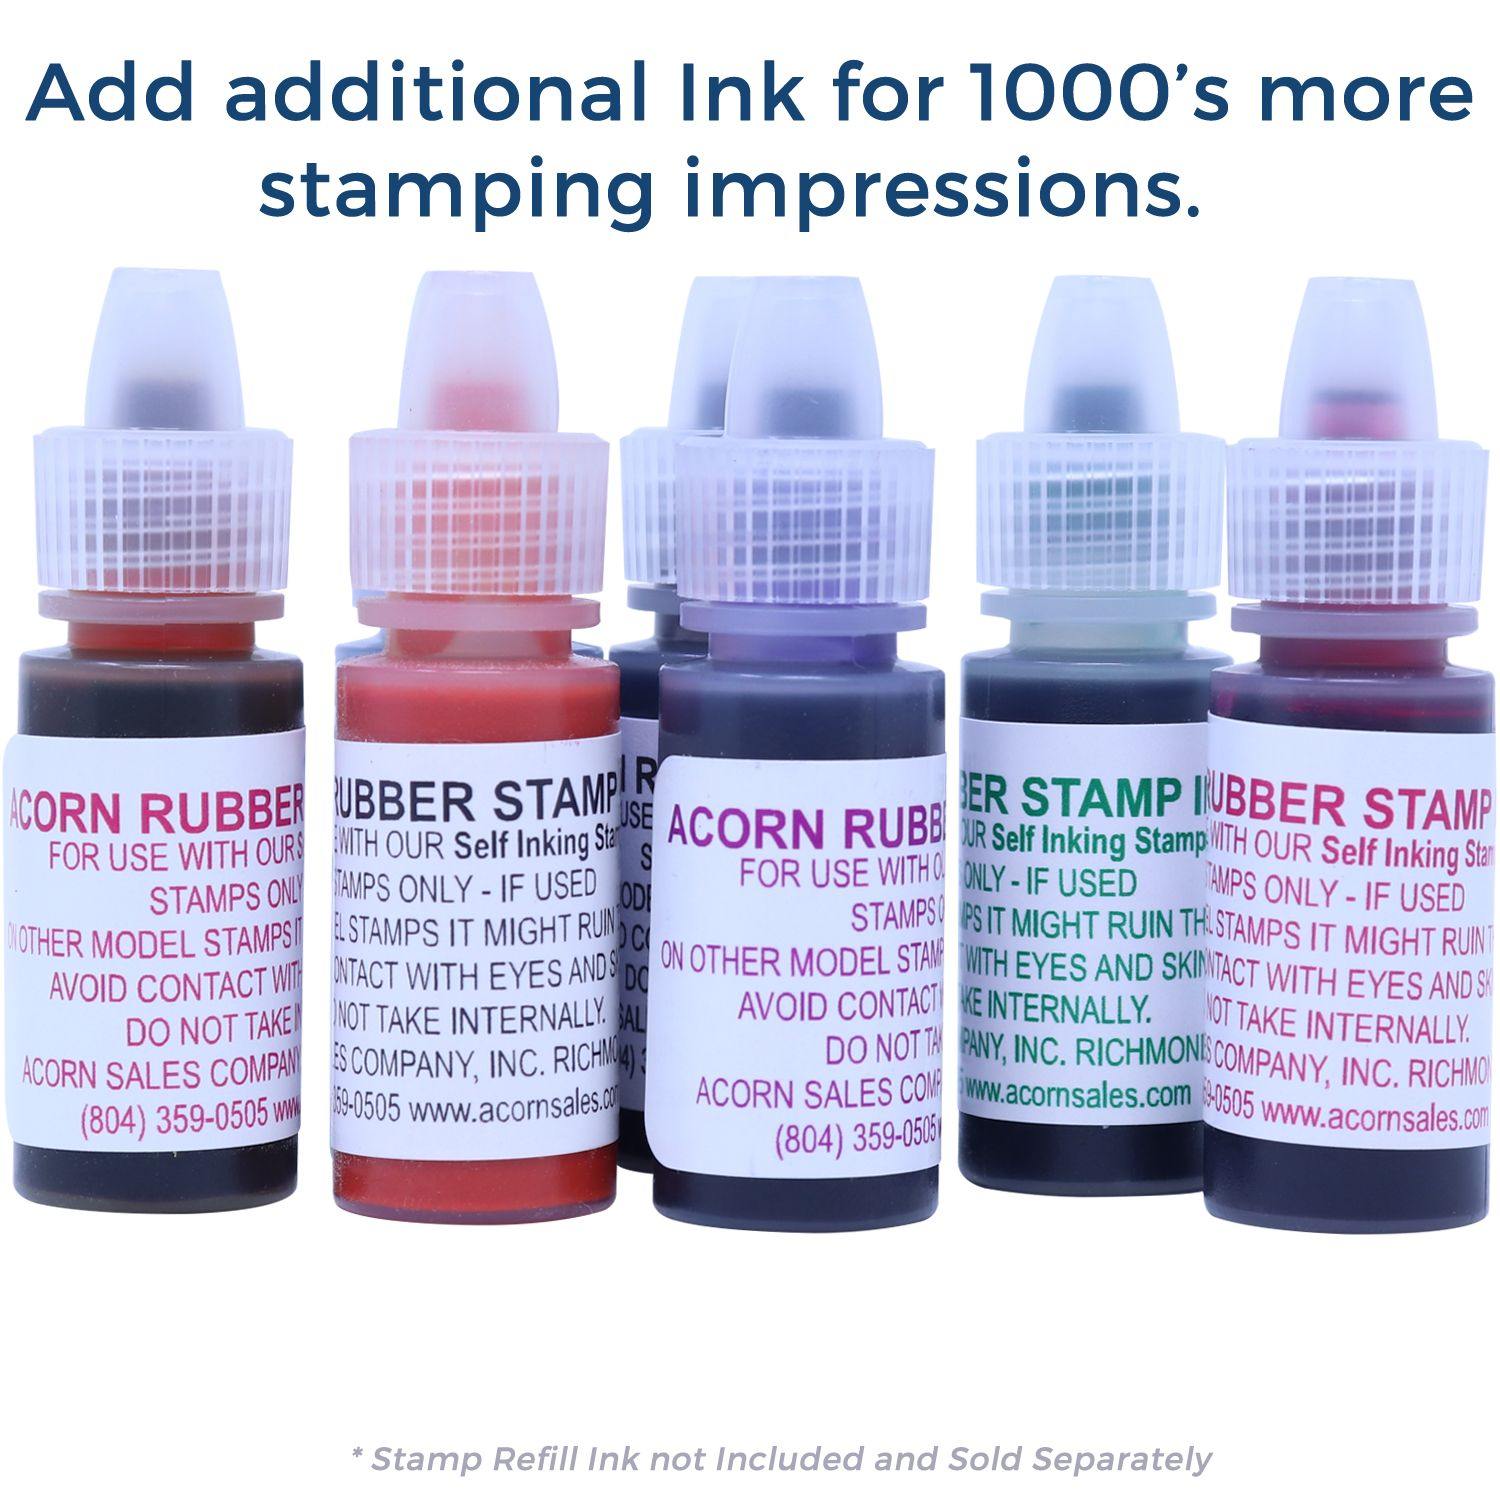 Refill Inks for Slim Pre-Inked Narrow Font Non-Smoker Stamp Available